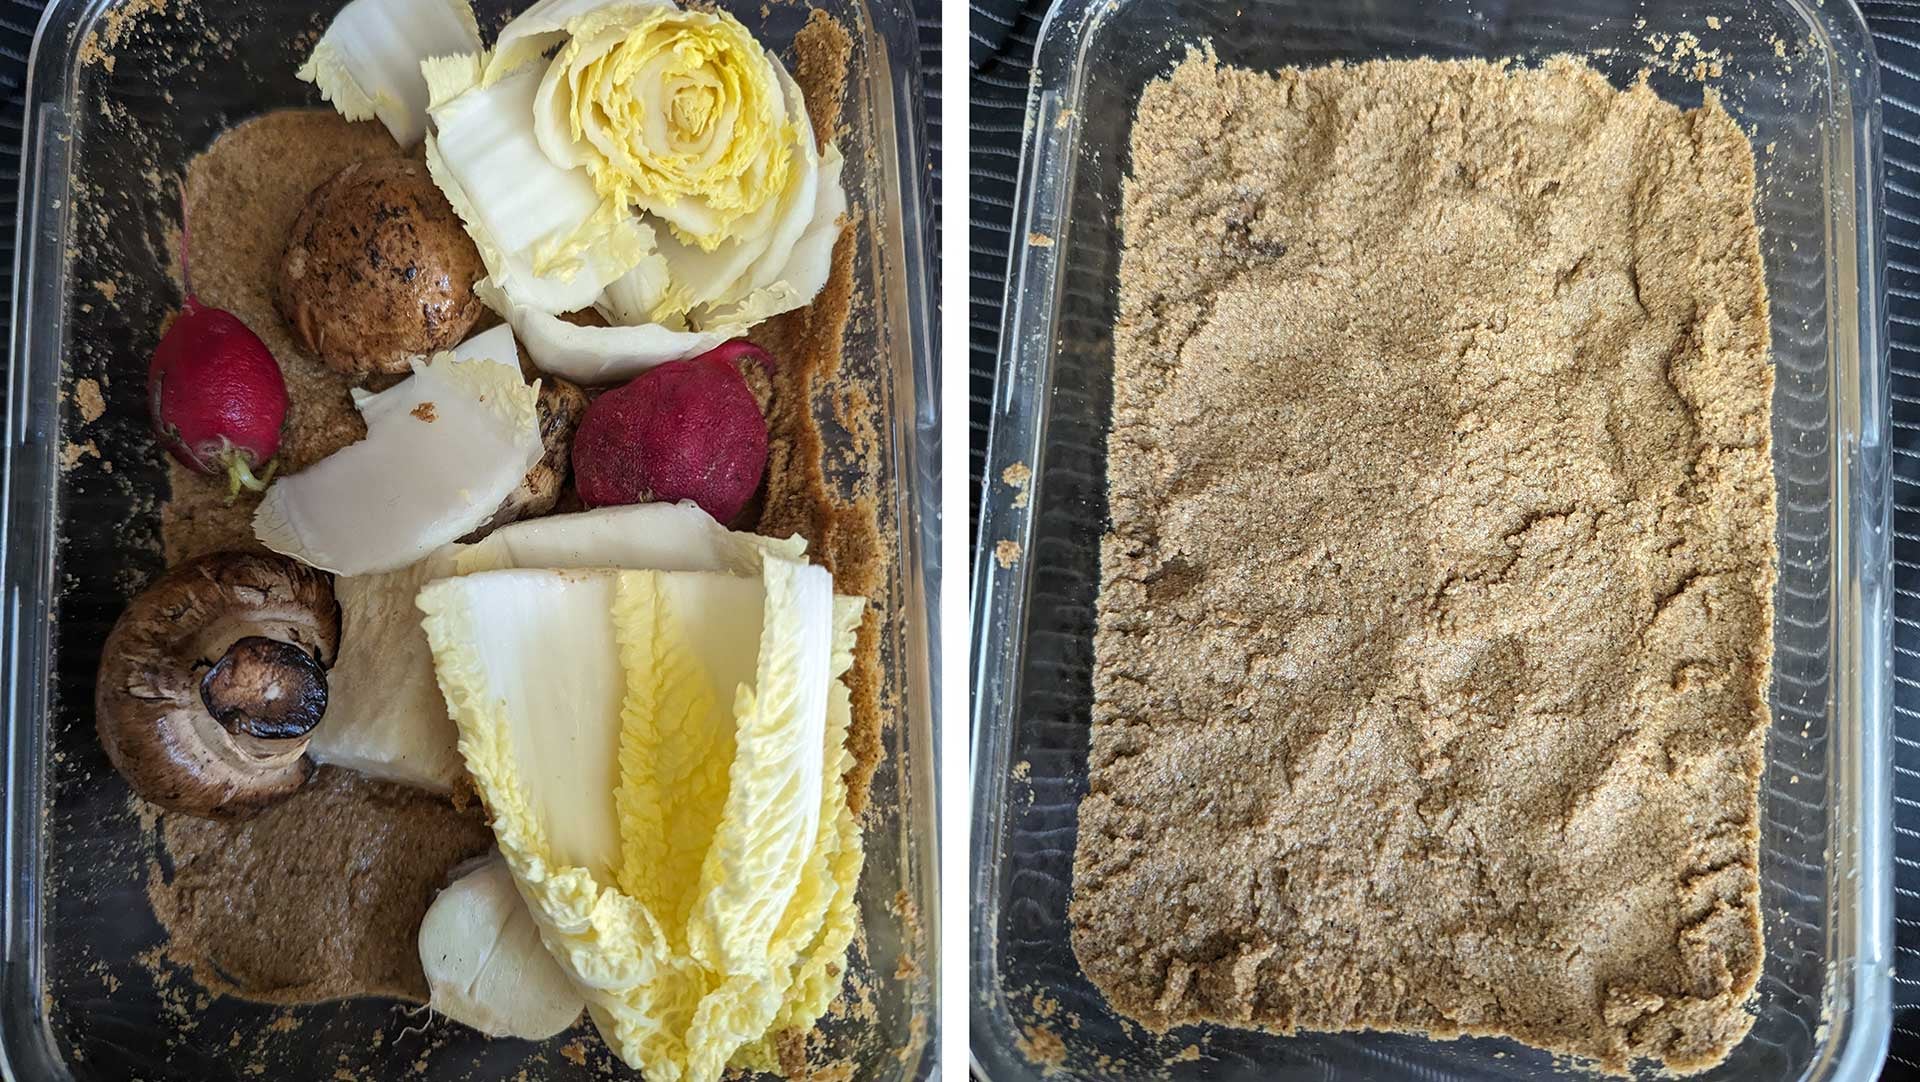 On the left, everything about to go into the nuka bed, and on the right, all the vegetables, now buried in the bran.  (Photo: Amanda Blum)